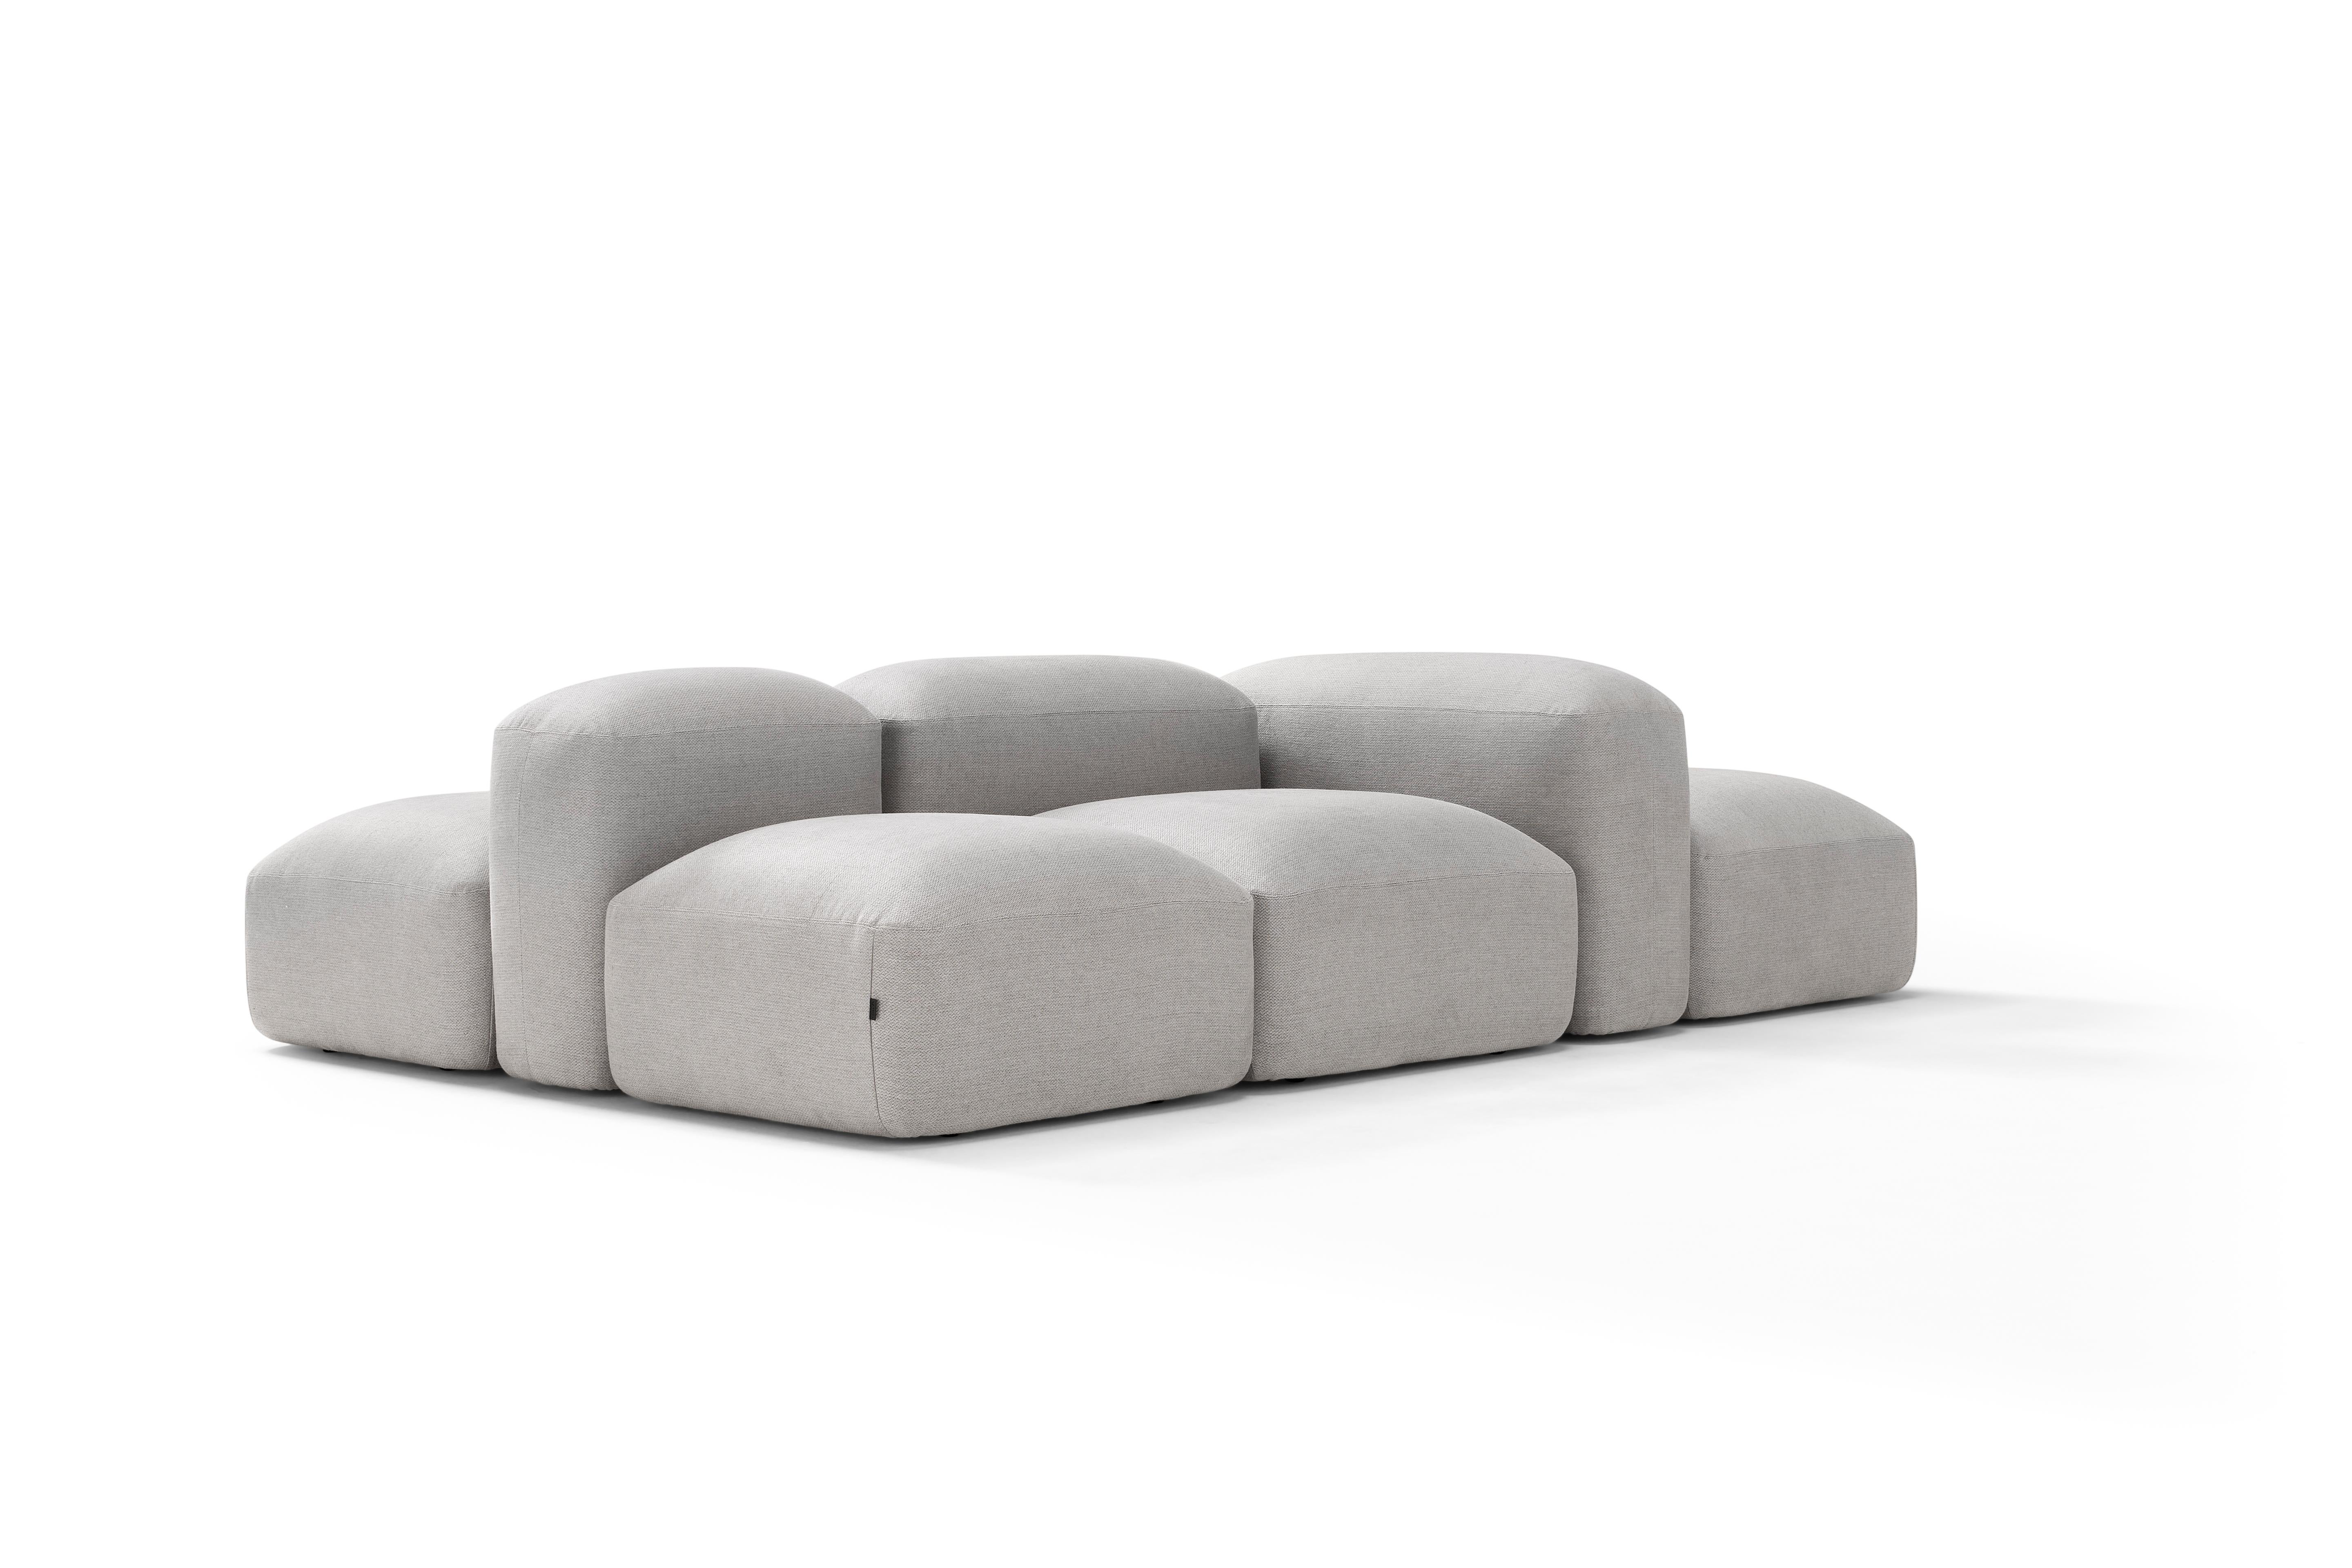 Organic Modern Modular and Customizable Sofa 'Lapis' E009 'many layouts and fabrics available' For Sale